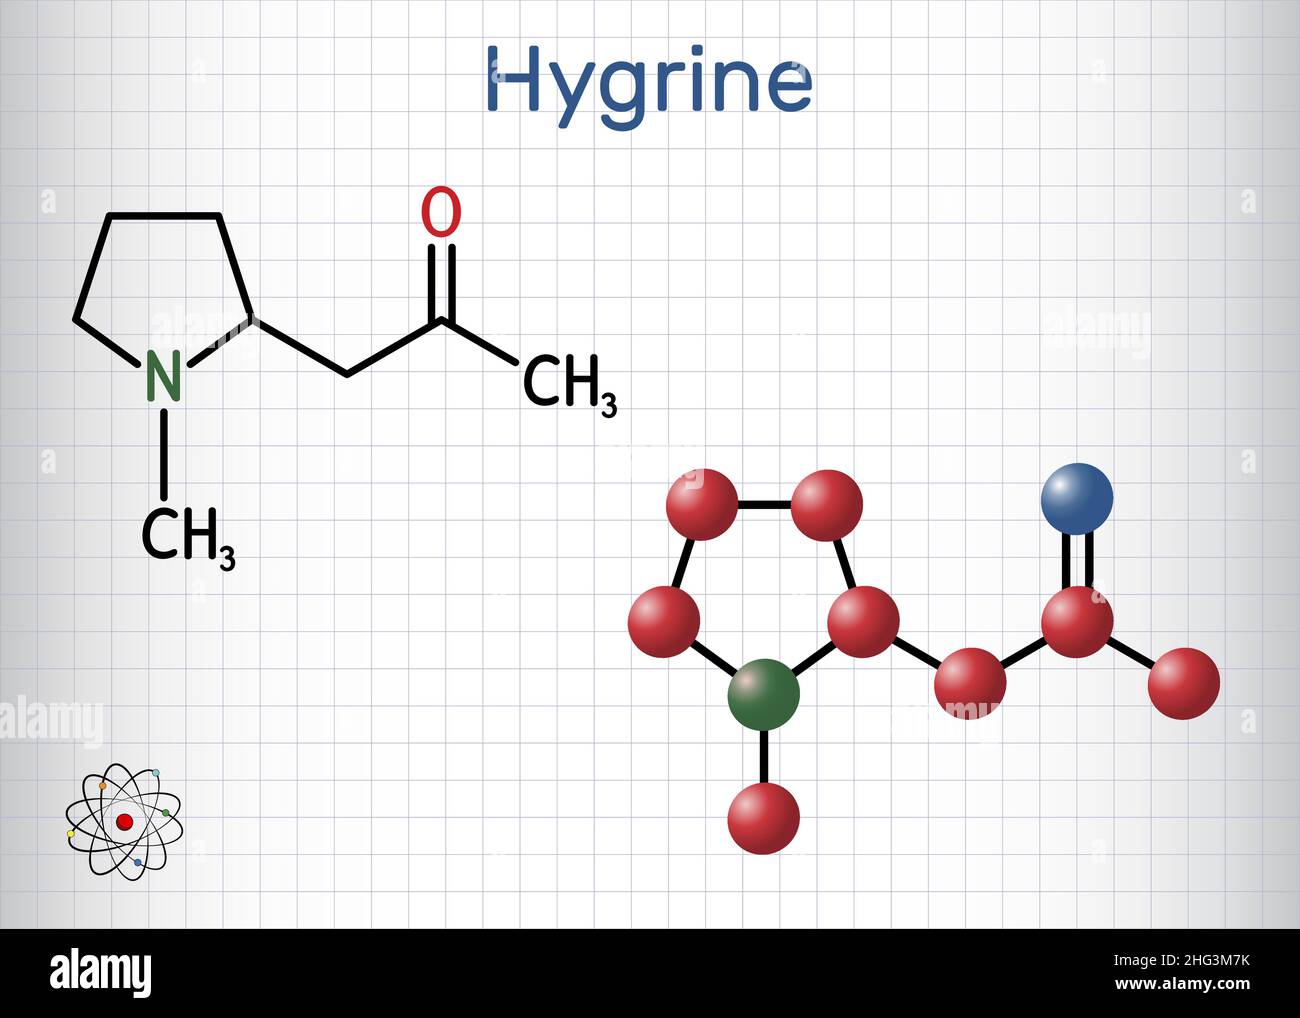 Hygrine pyrrolidine alkaloid molecule. It is found in the coca plant. Structural chemical formula and molecule model. Sheet of paper in a cage. Vector Stock Vector